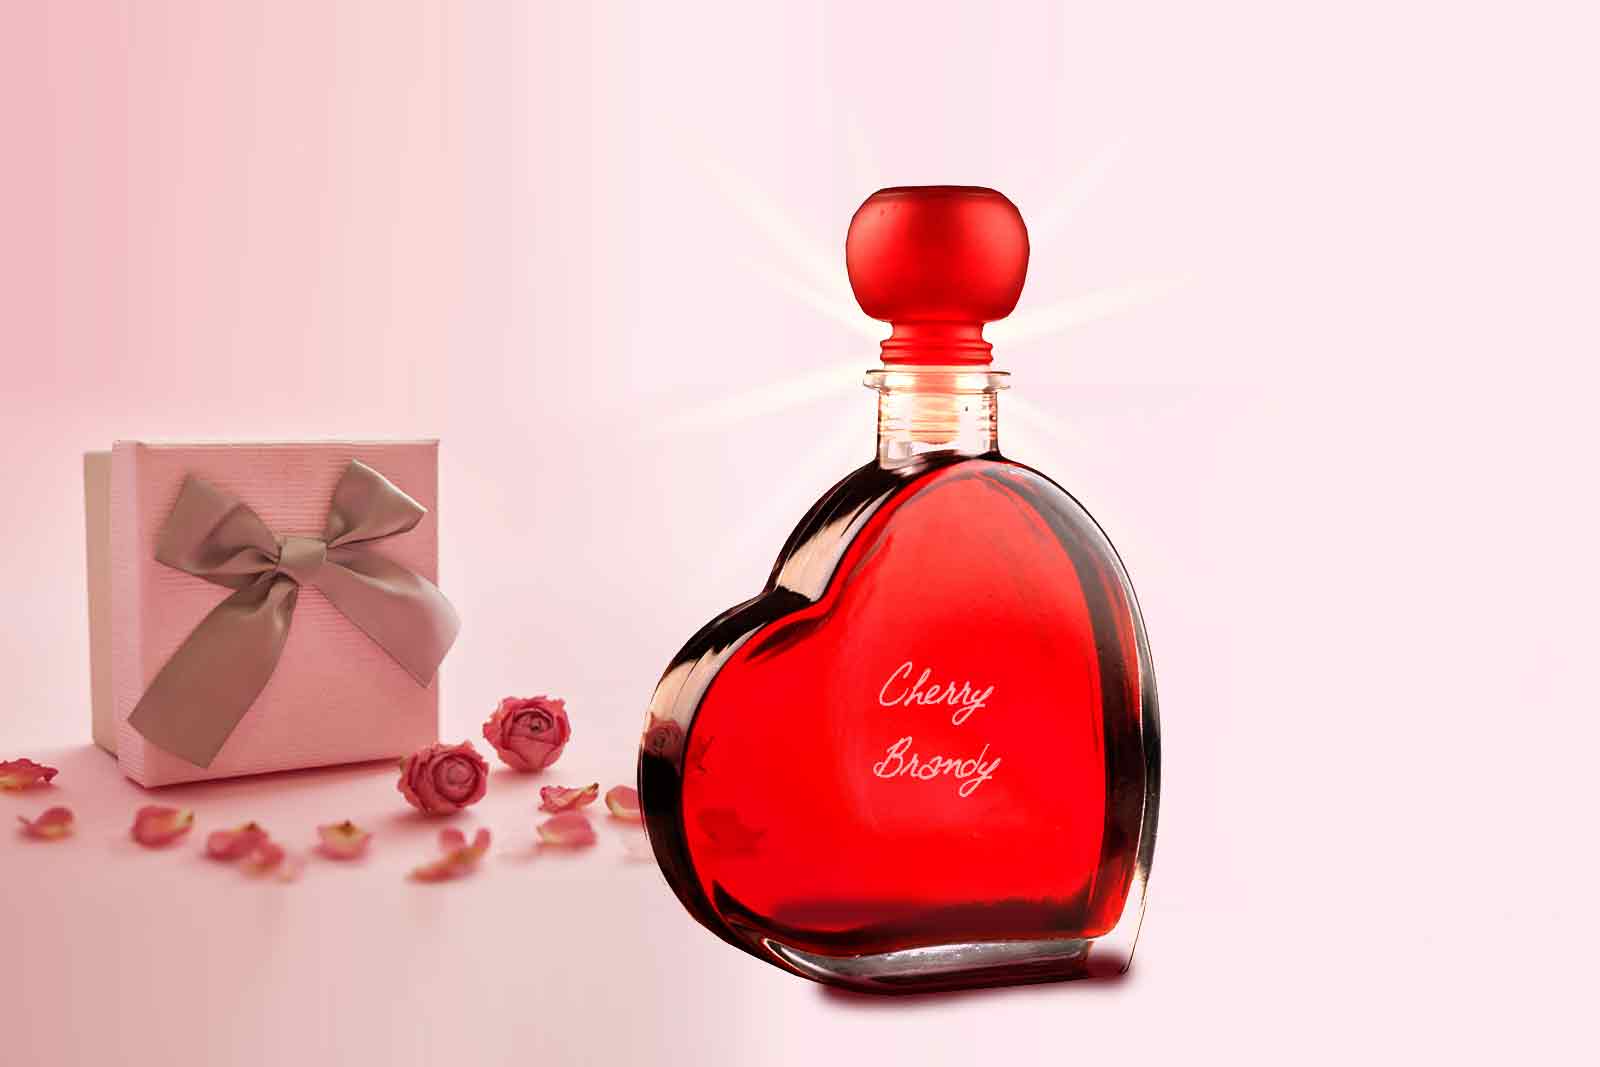 Passion Heart 200ml with Red Cherry Brandy